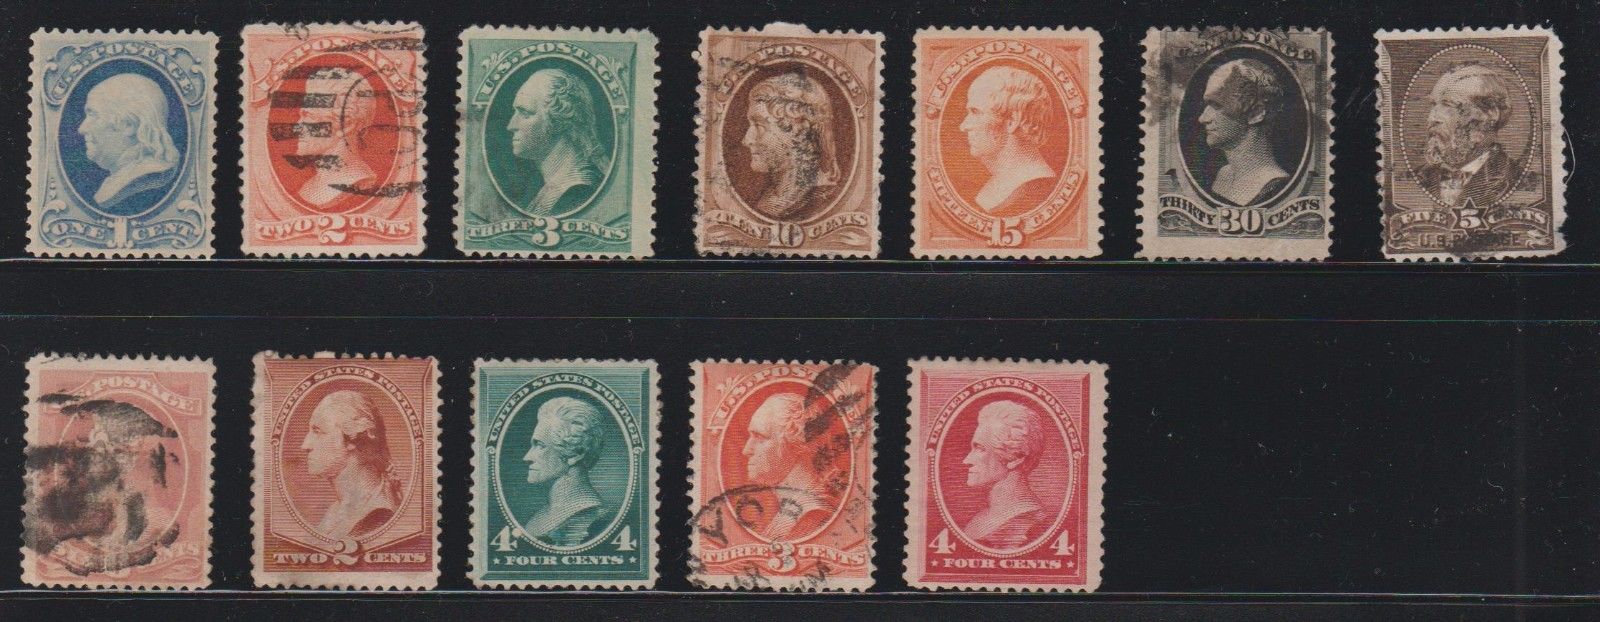 *1879 ~1888 U.S Stamp Collection Mint & Used / Scott Value $1200+